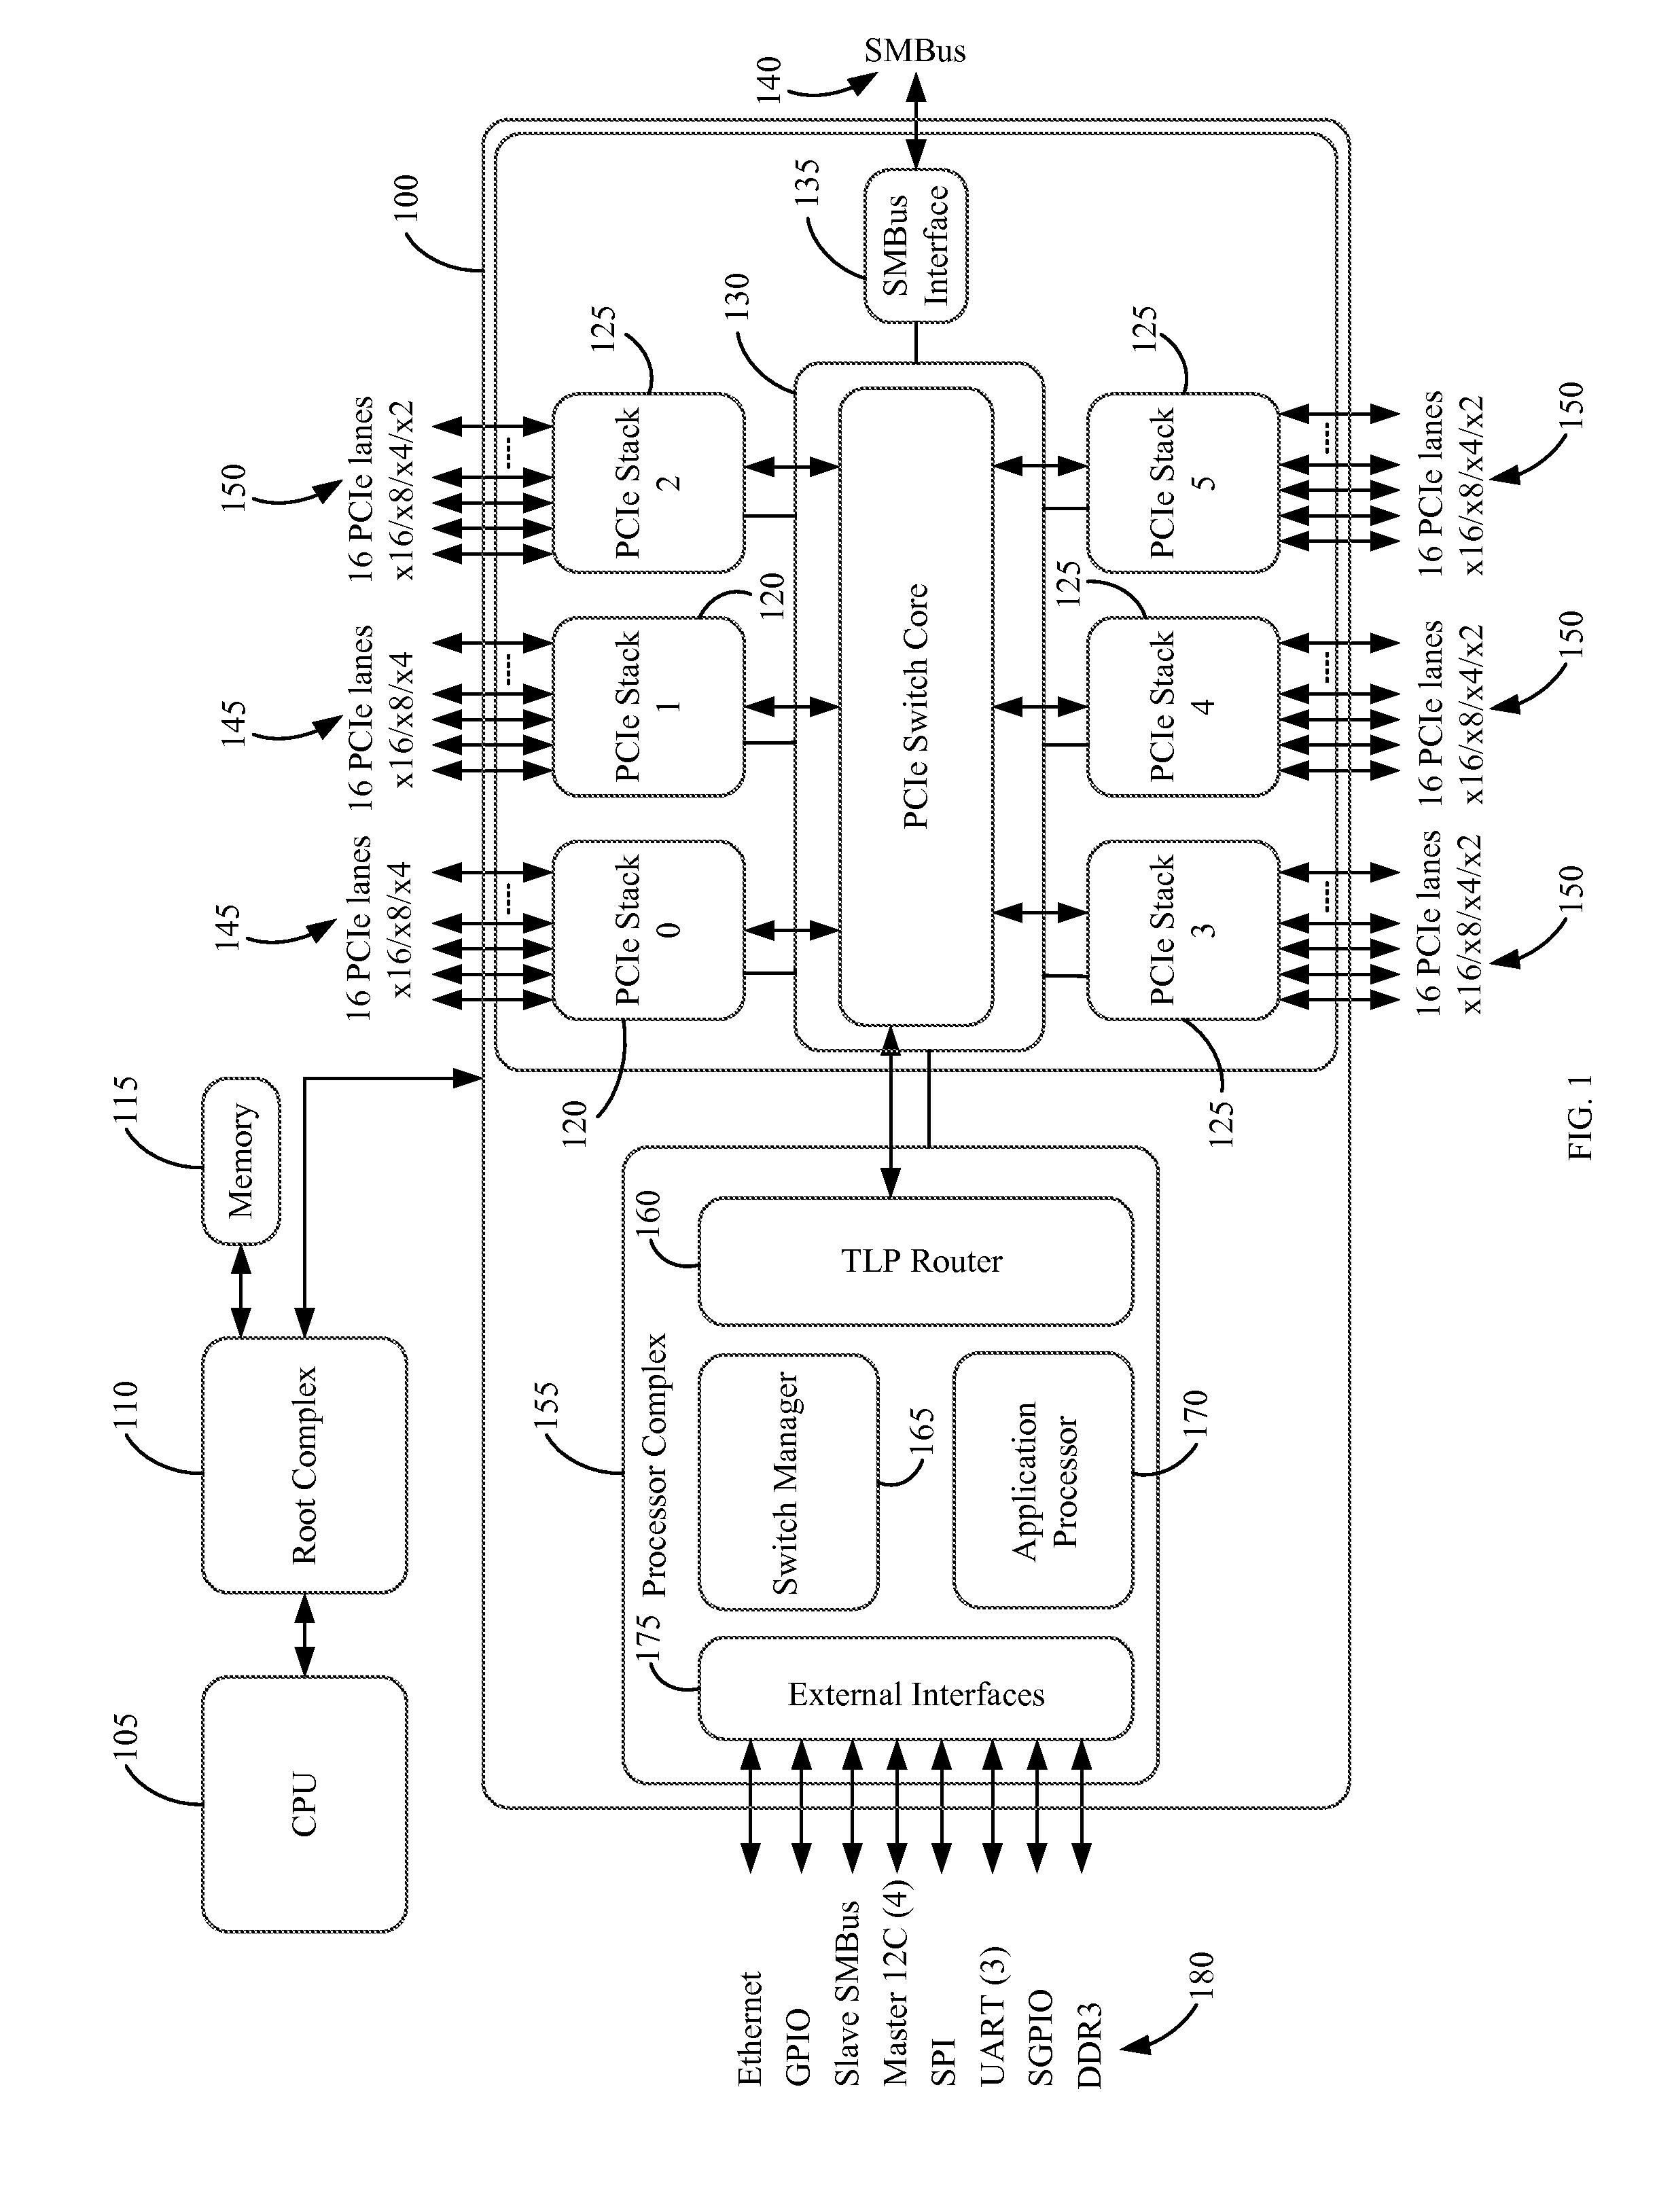 Method and apparatus for translated routing in an interconnect switch